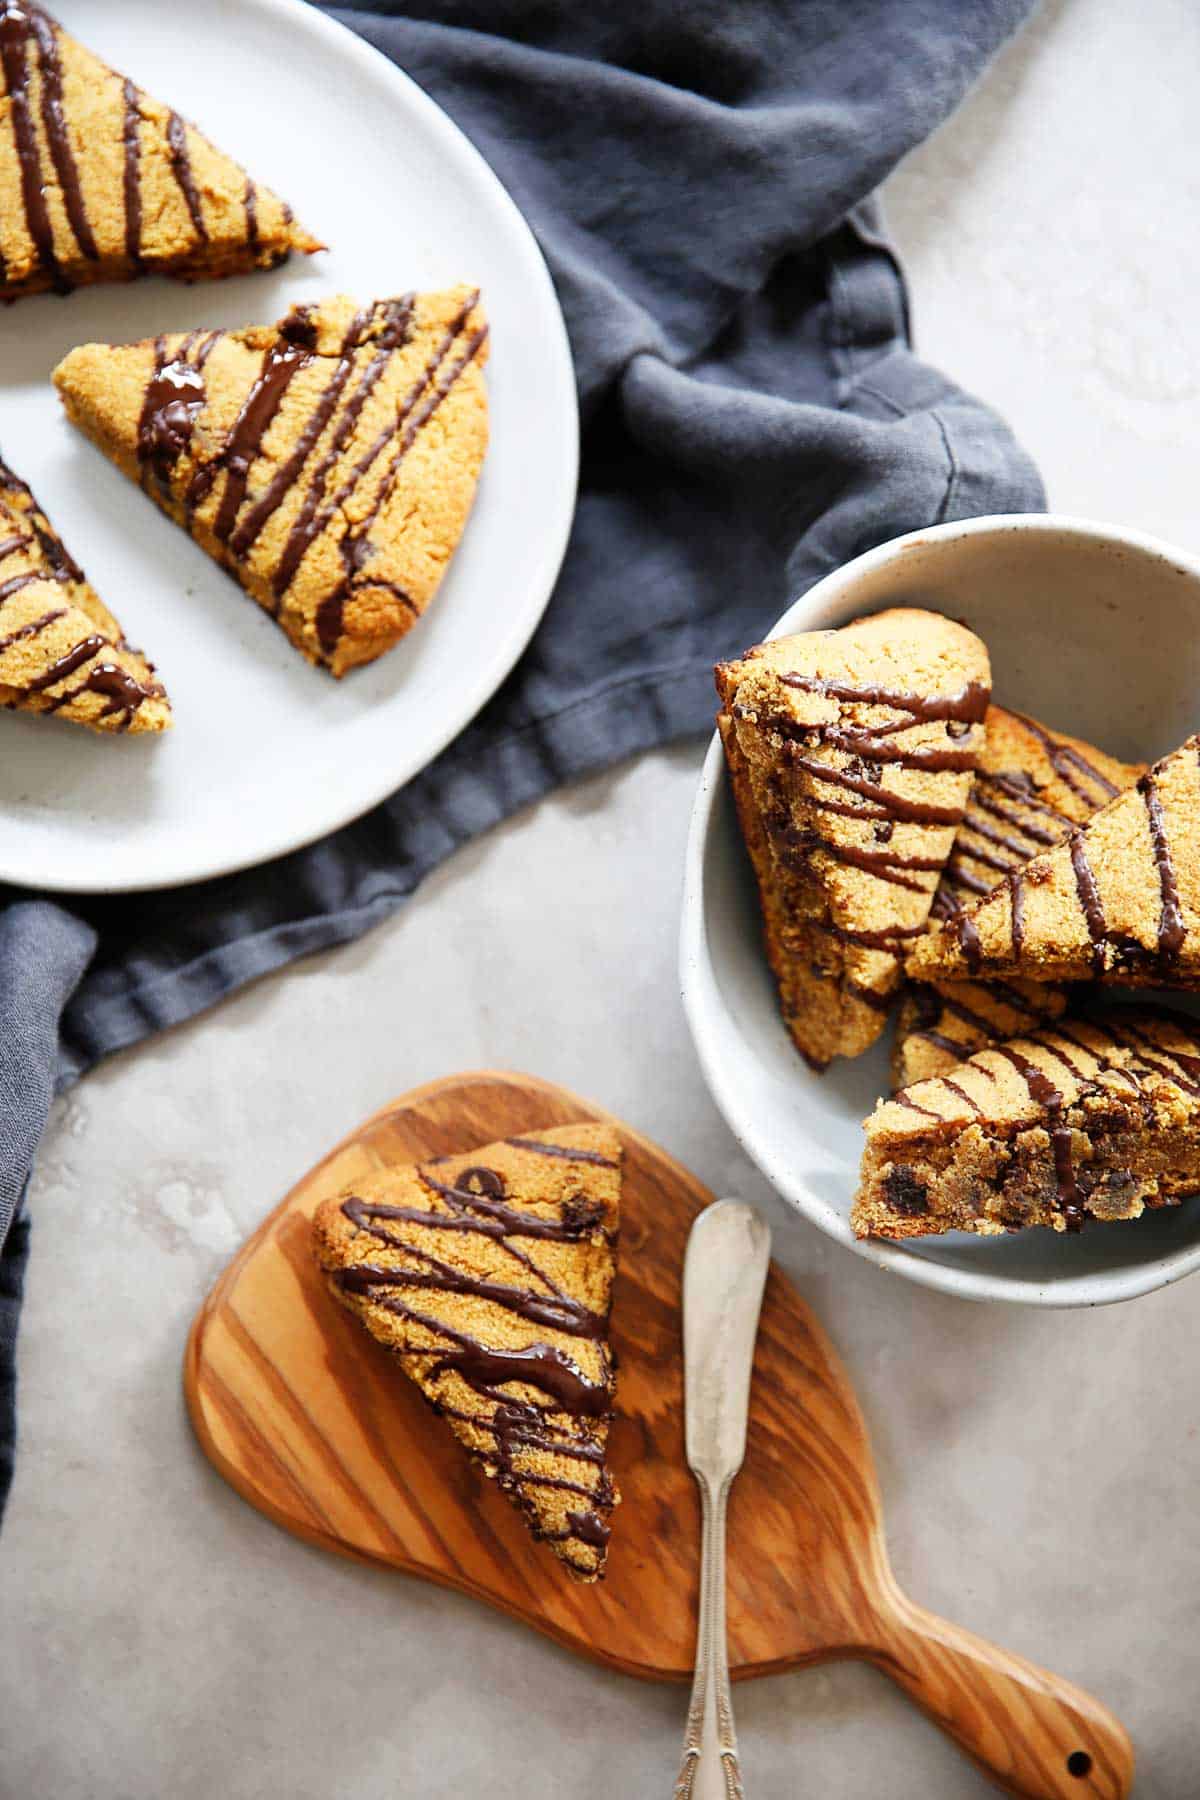 A pumpkin scone with chocolate drizzled over it on a cutting board with a knife.